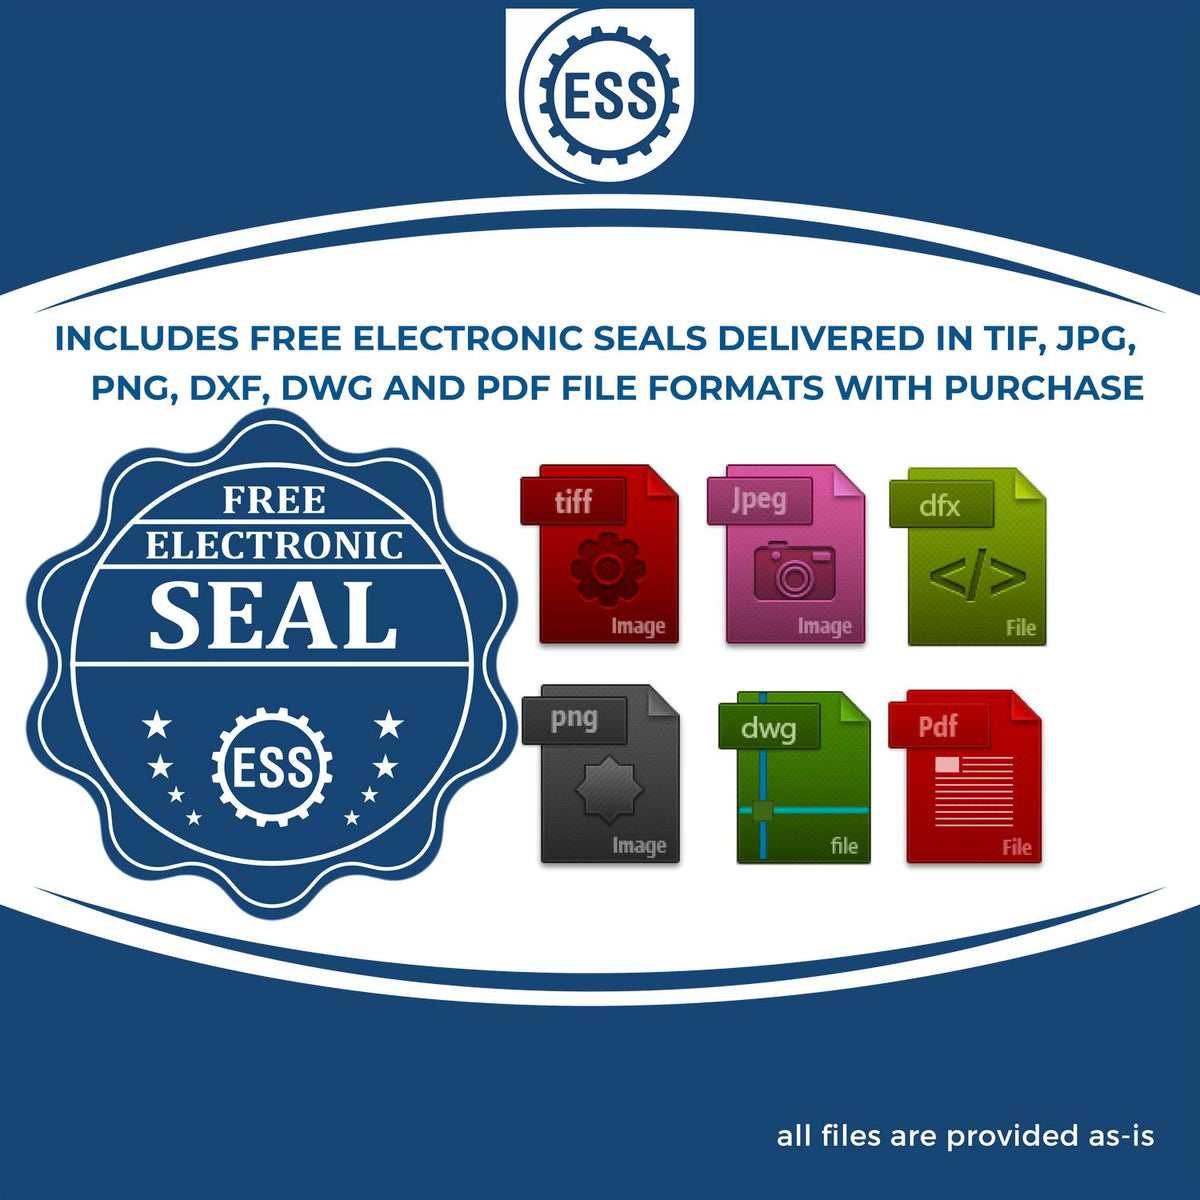 An infographic for the free electronic seal for the Hybrid West Virginia Land Surveyor Seal illustrating the different file type icons such as DXF, DWG, TIF, JPG and PNG.